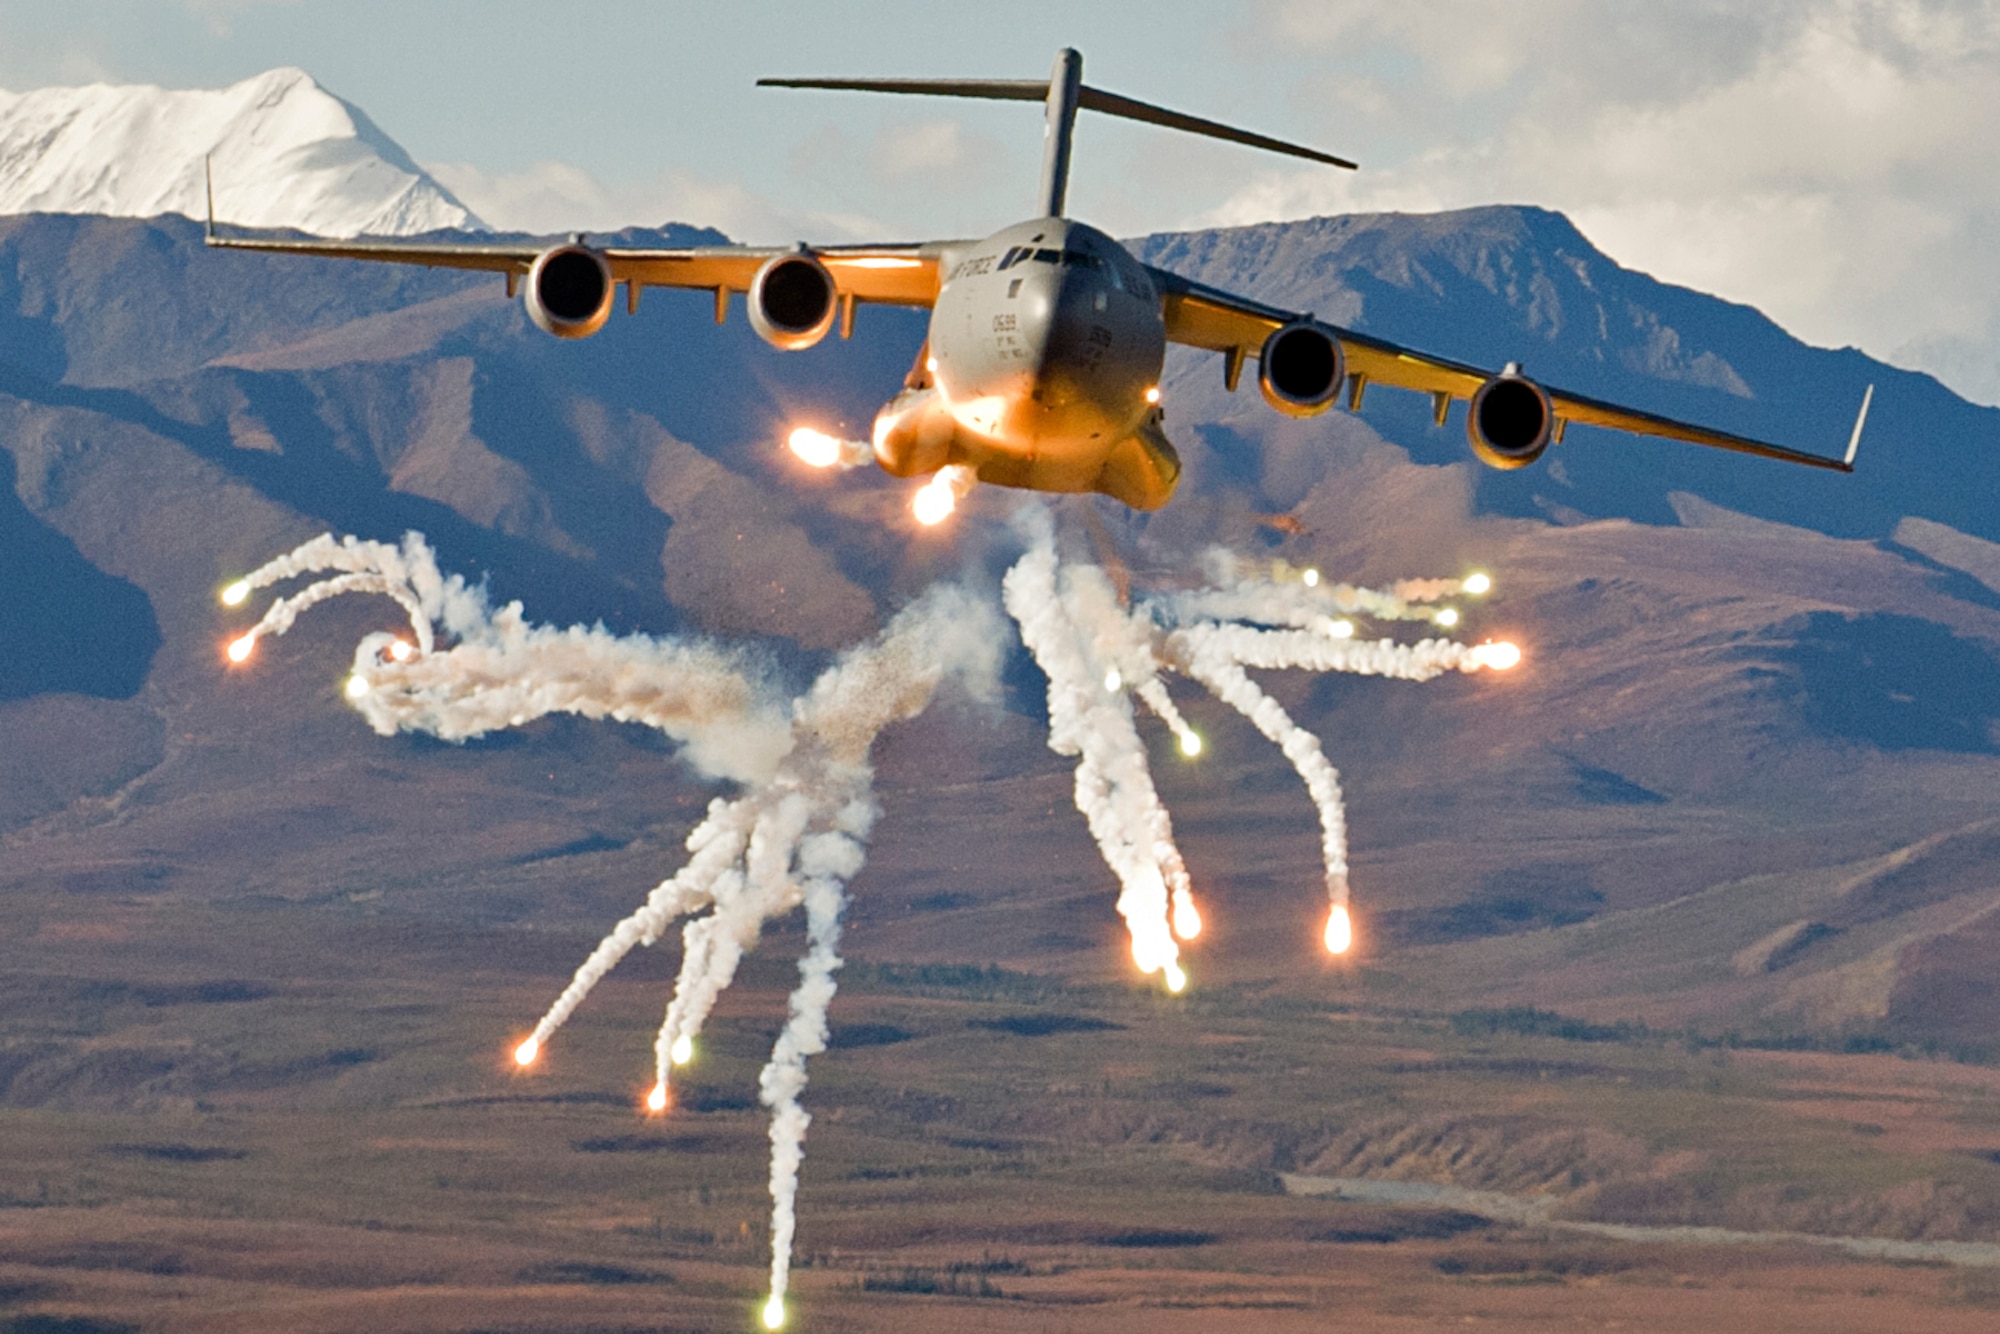 A C-17 Globemaster III cargo plane sets off flares during the 3rd Wing "war day," Sept. 21, 2012. The Discovery Channel is going to feature the C-17 on a future episode of "Mighty Planes" and was here on Joint Base Elemendorf-Richardson filming. (U.S. Air Force photo/Staff Sgt. Zachary Wolf)